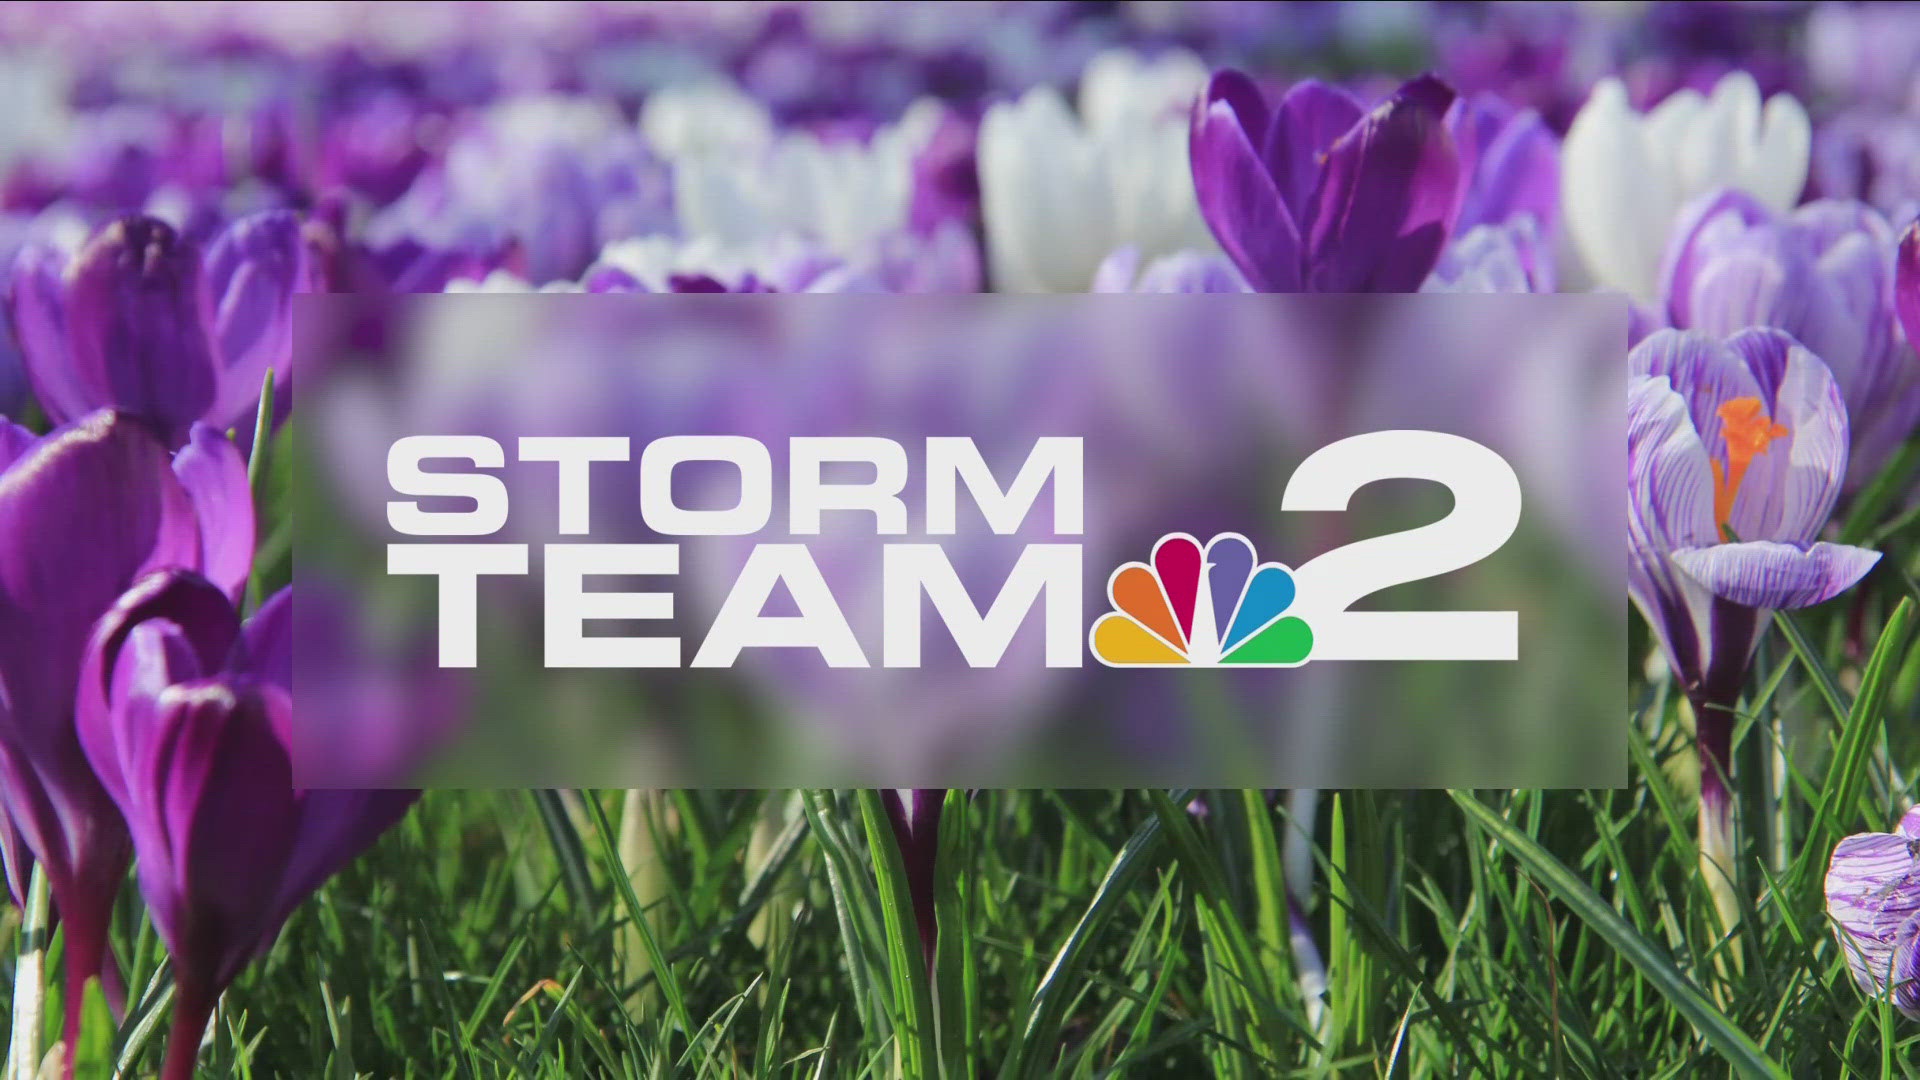 Storm Team 2 night forecast with Jennifer Stanonis for Friday, May 10.